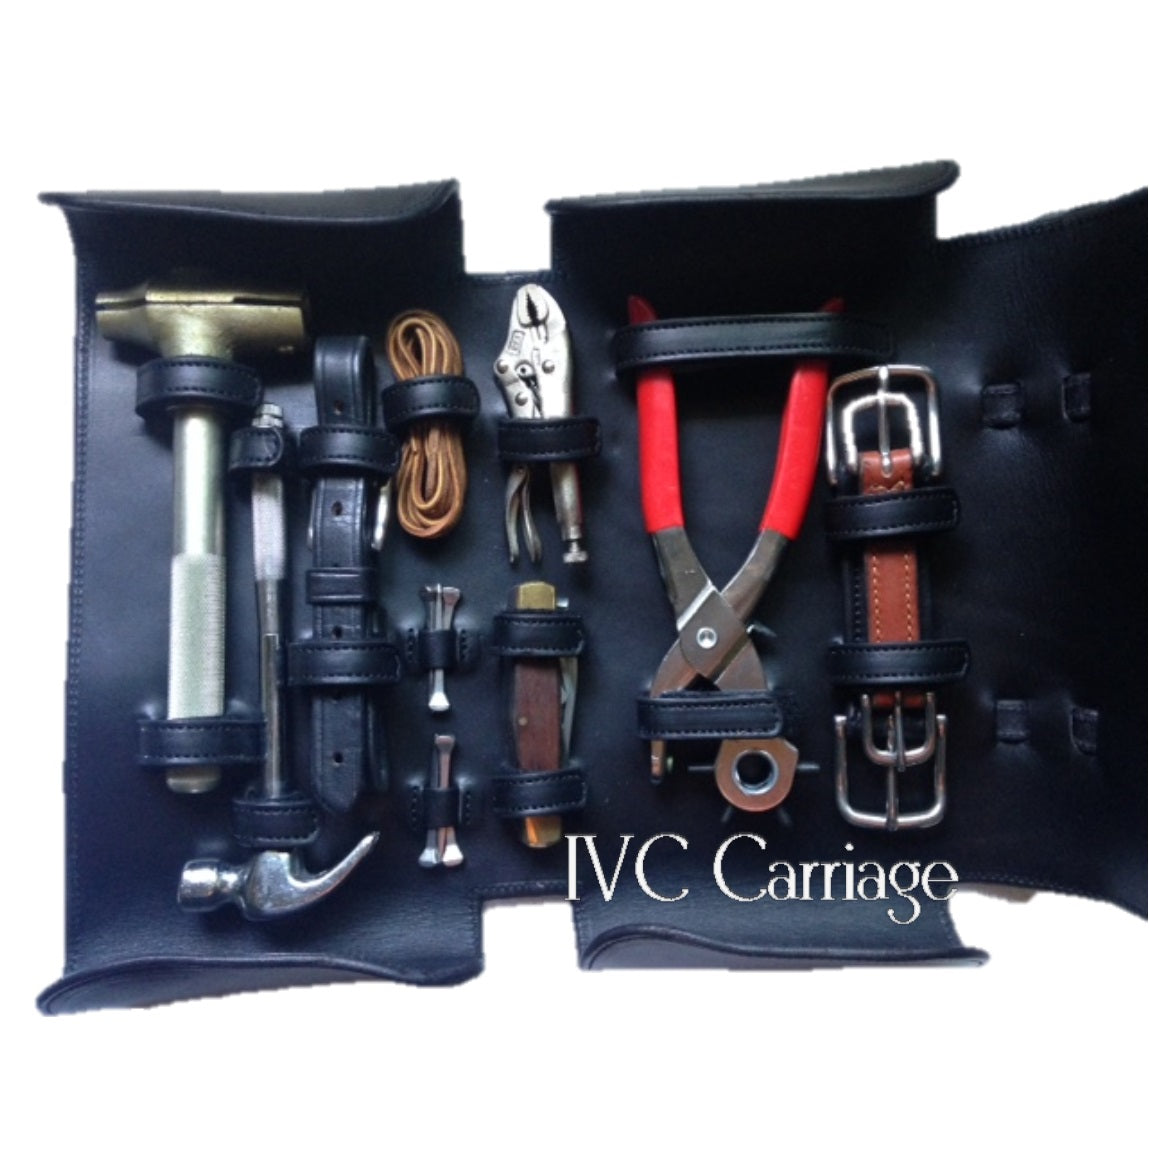 Smucker Spares Kit | IVC Carriage